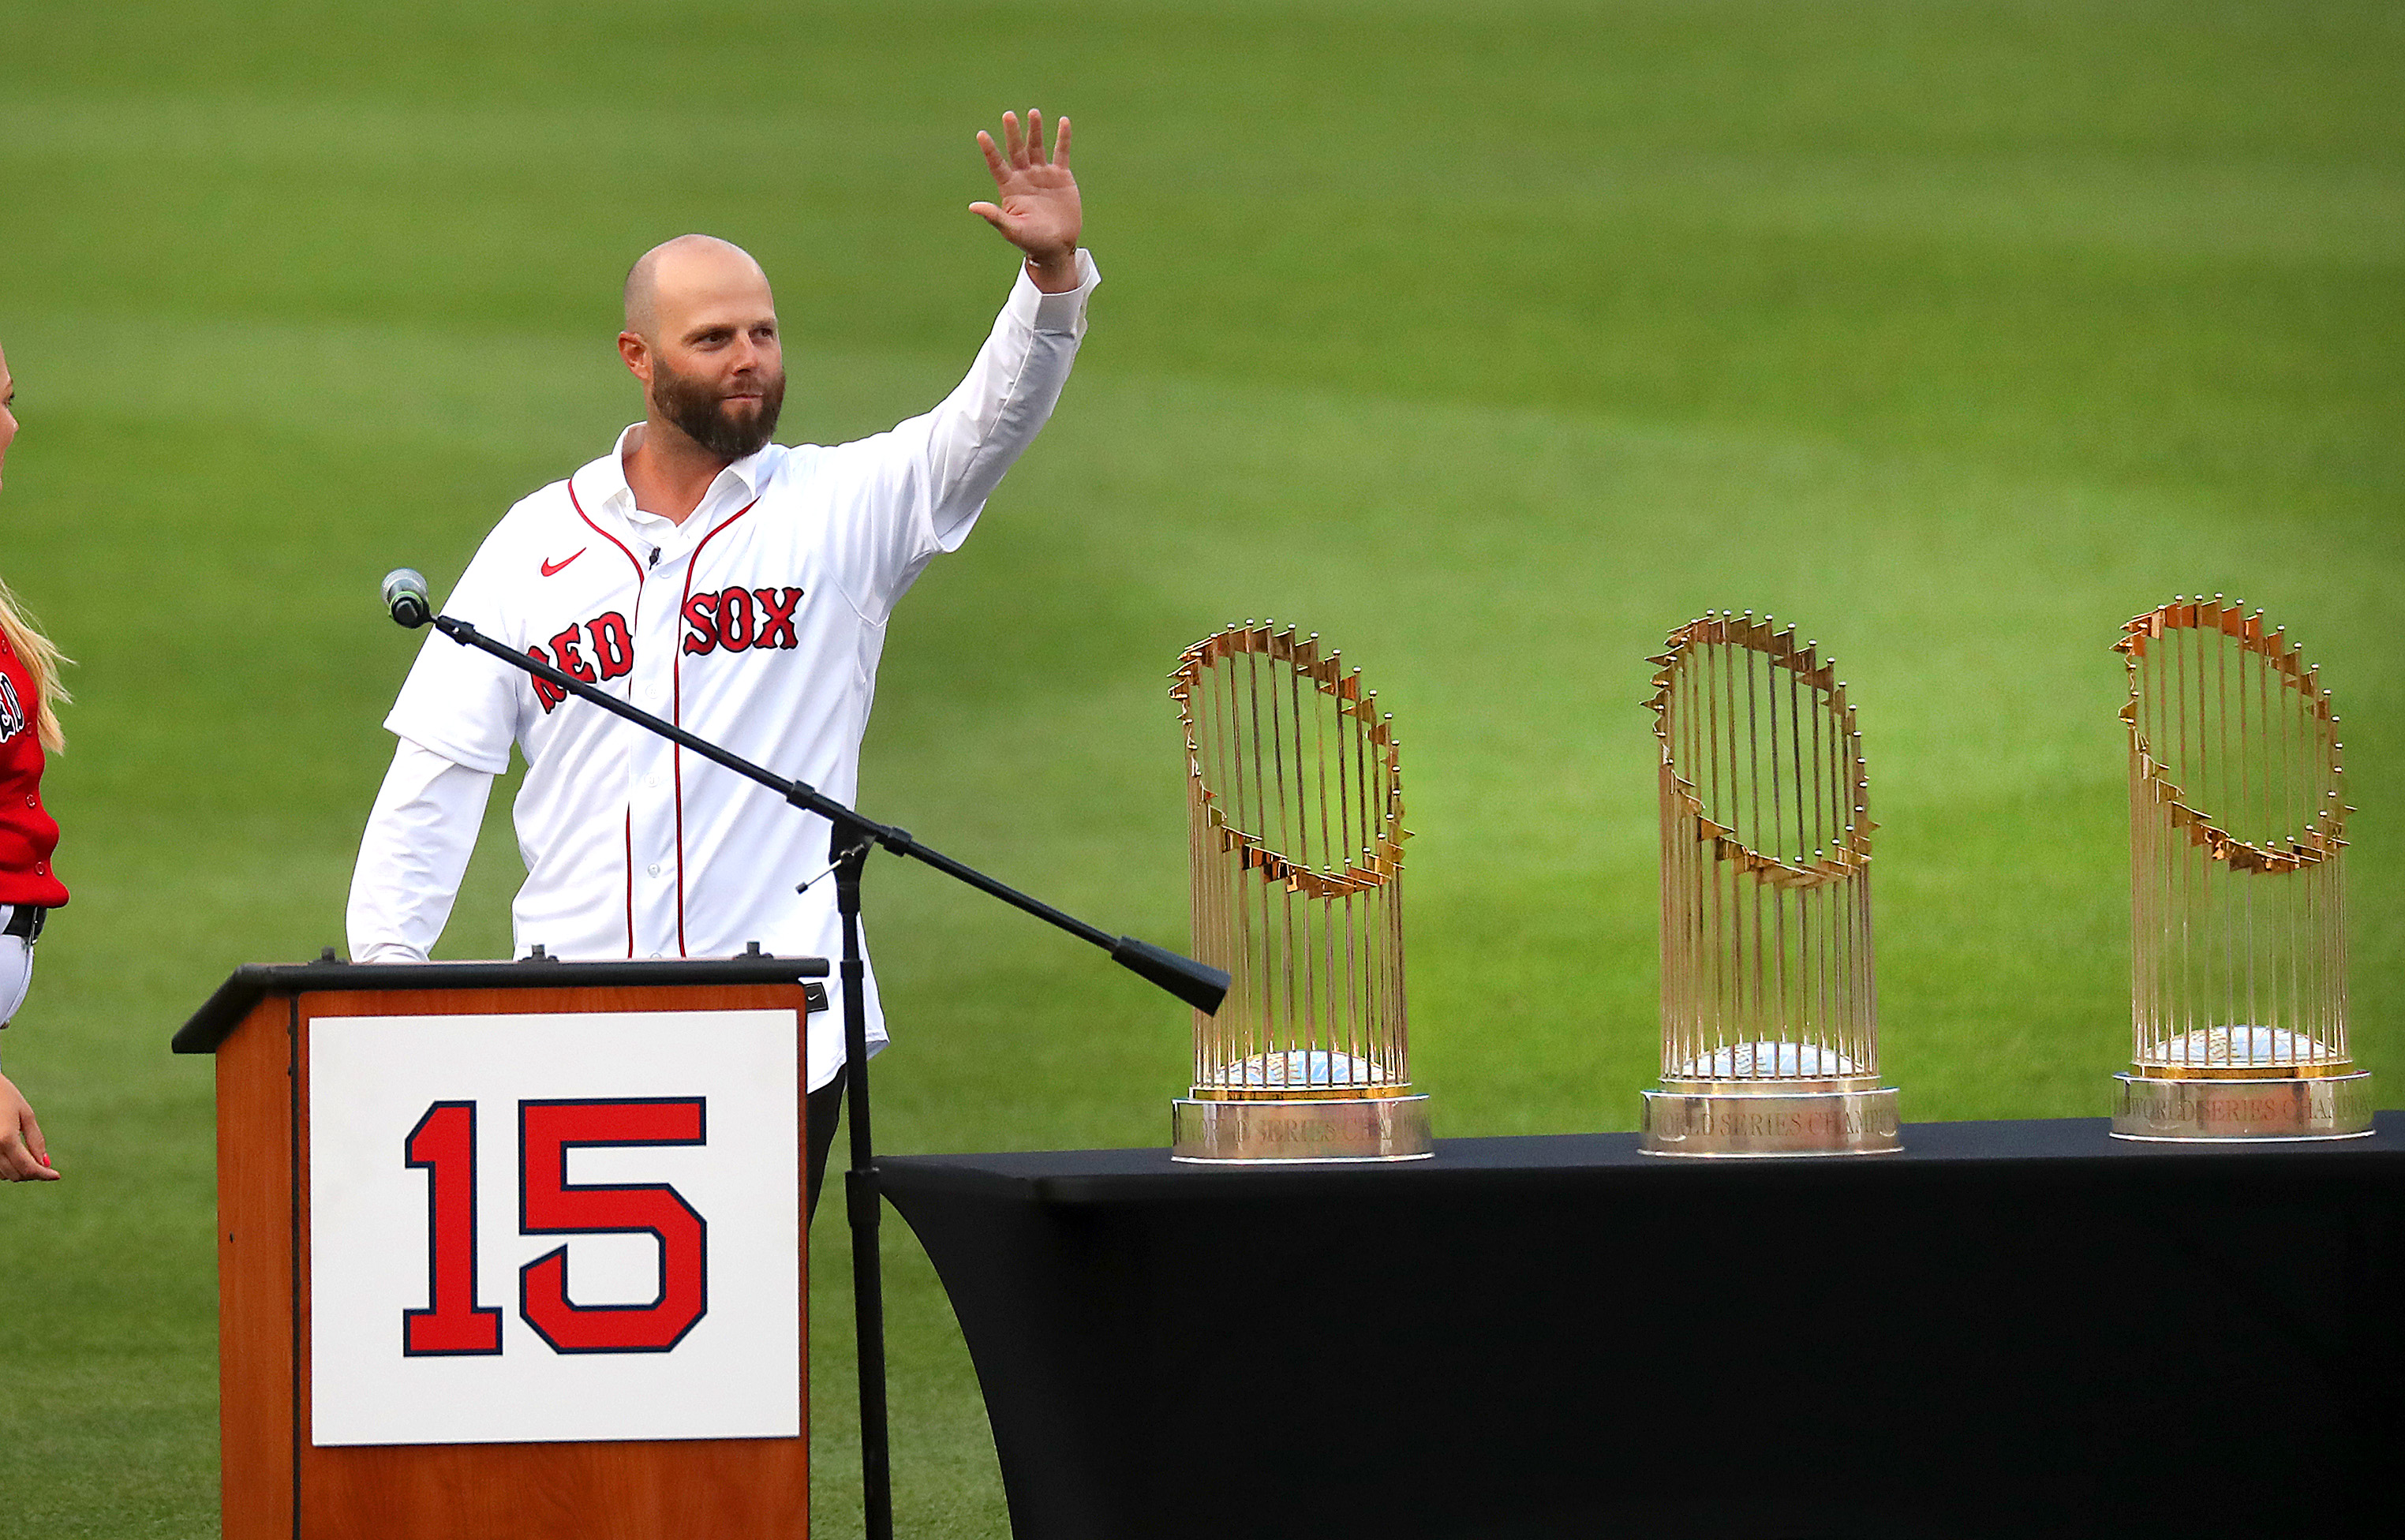 It means the world to me to be a Red Sox:' Dustin Pedroia gets fitting  farewell at Fenway - The Boston Globe